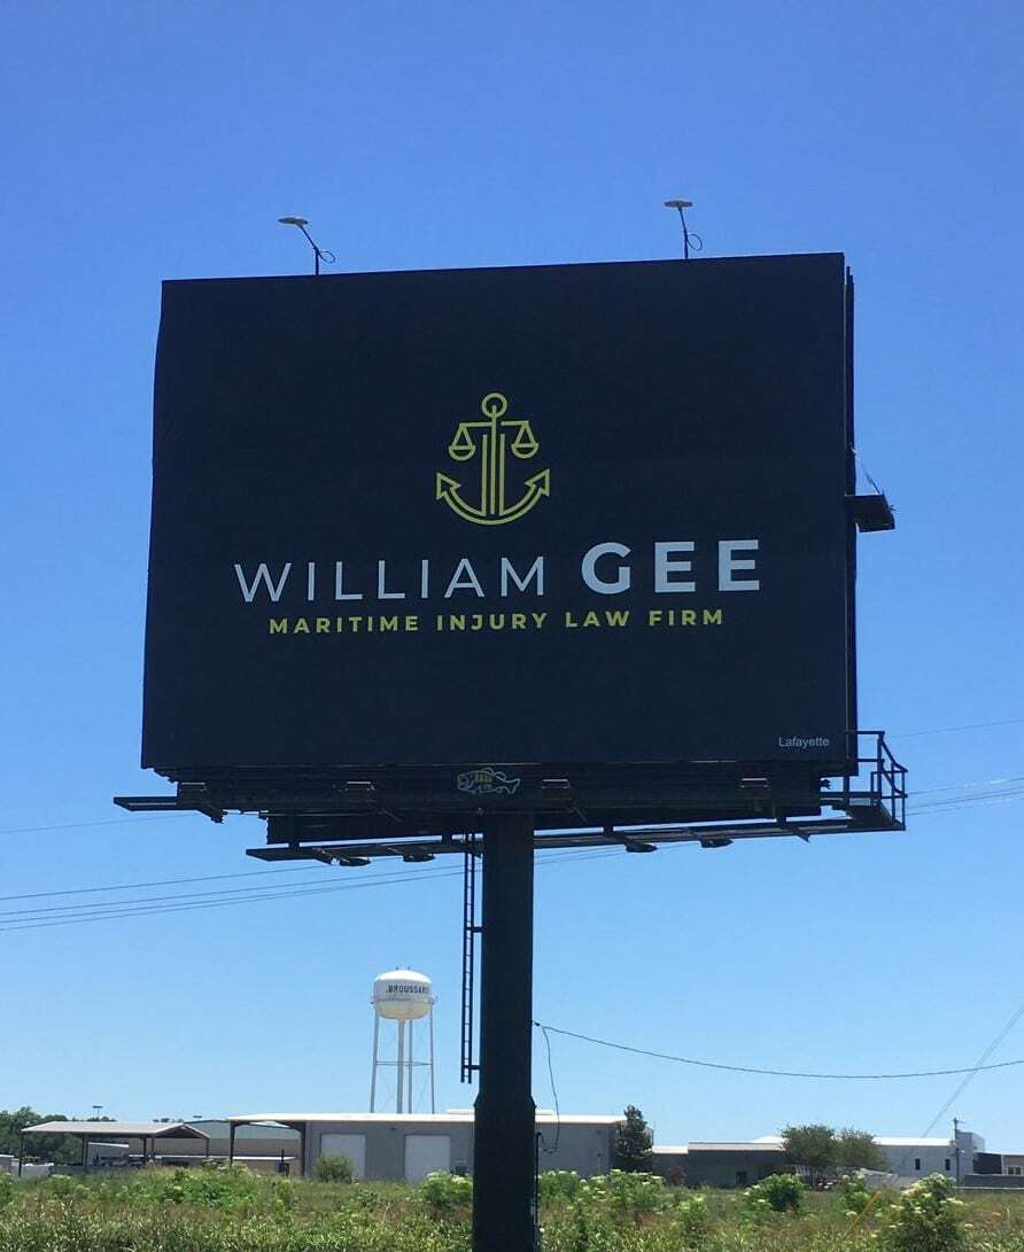 Photo of a billboard in Youngsville